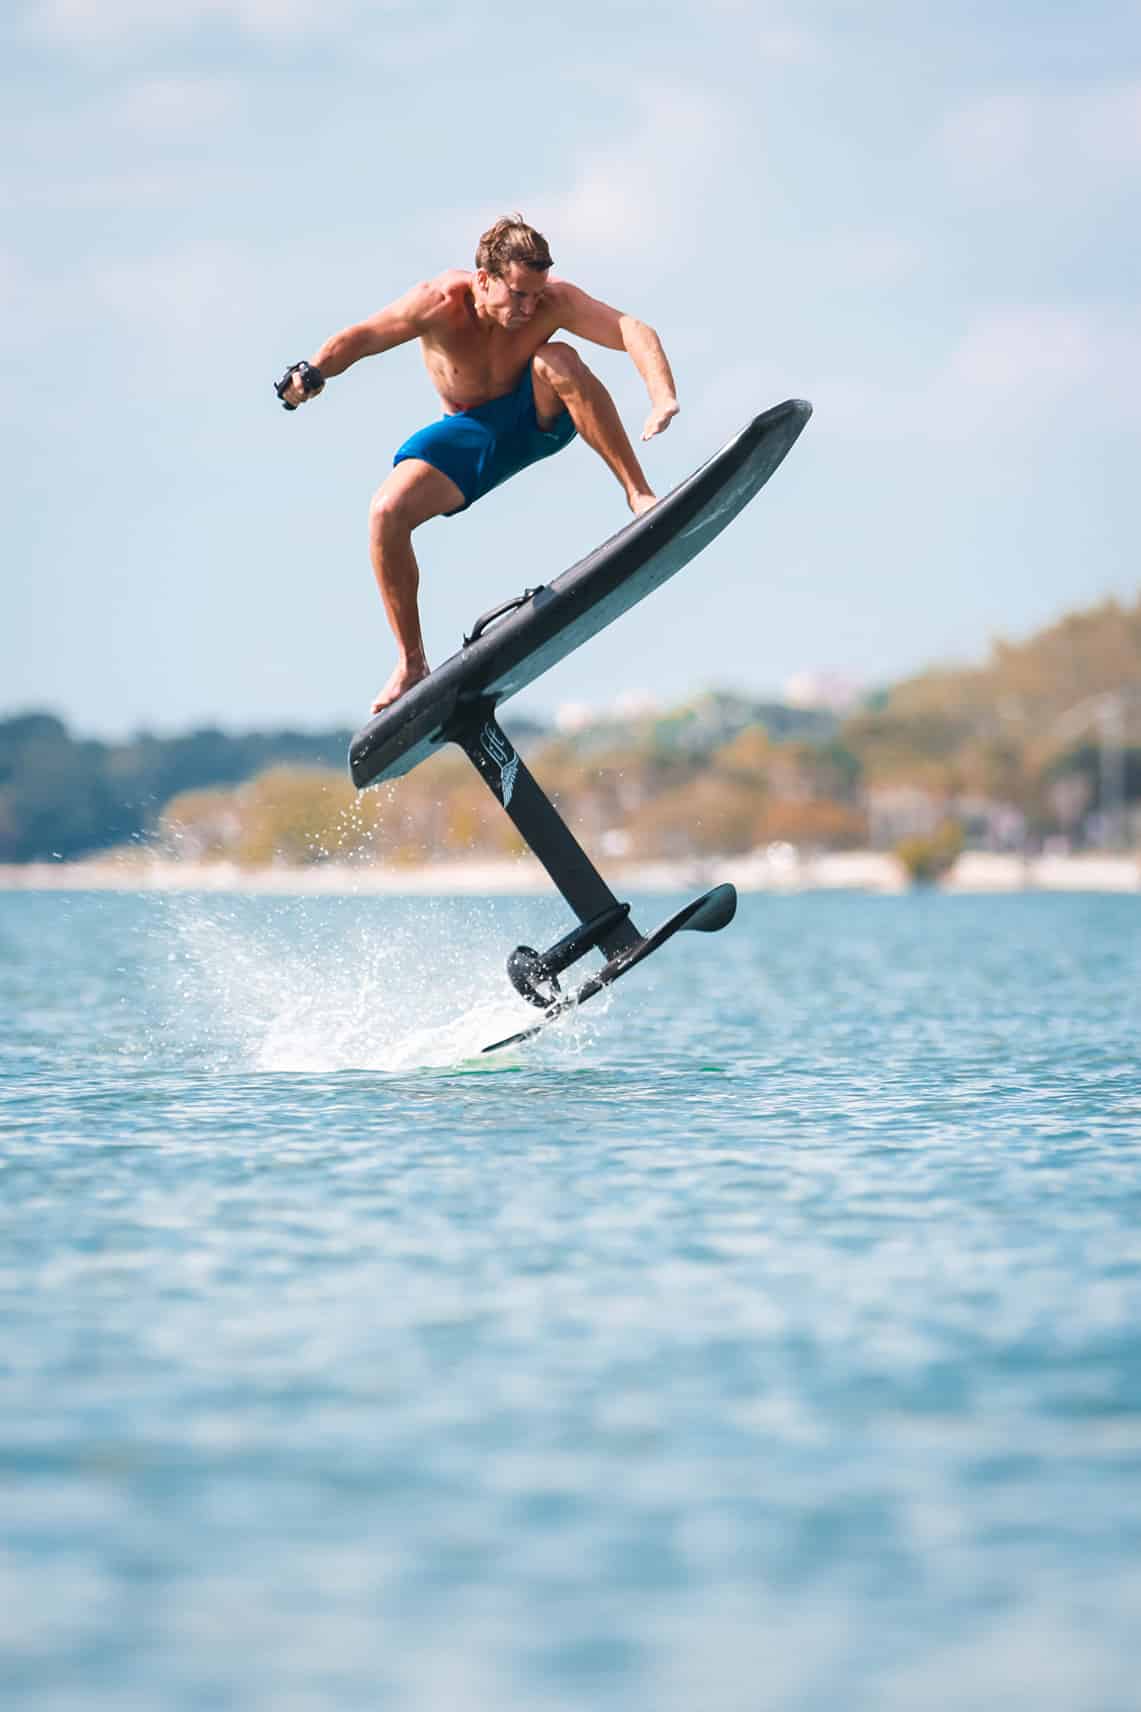 Foilboarding Changes the Face of Water Sports